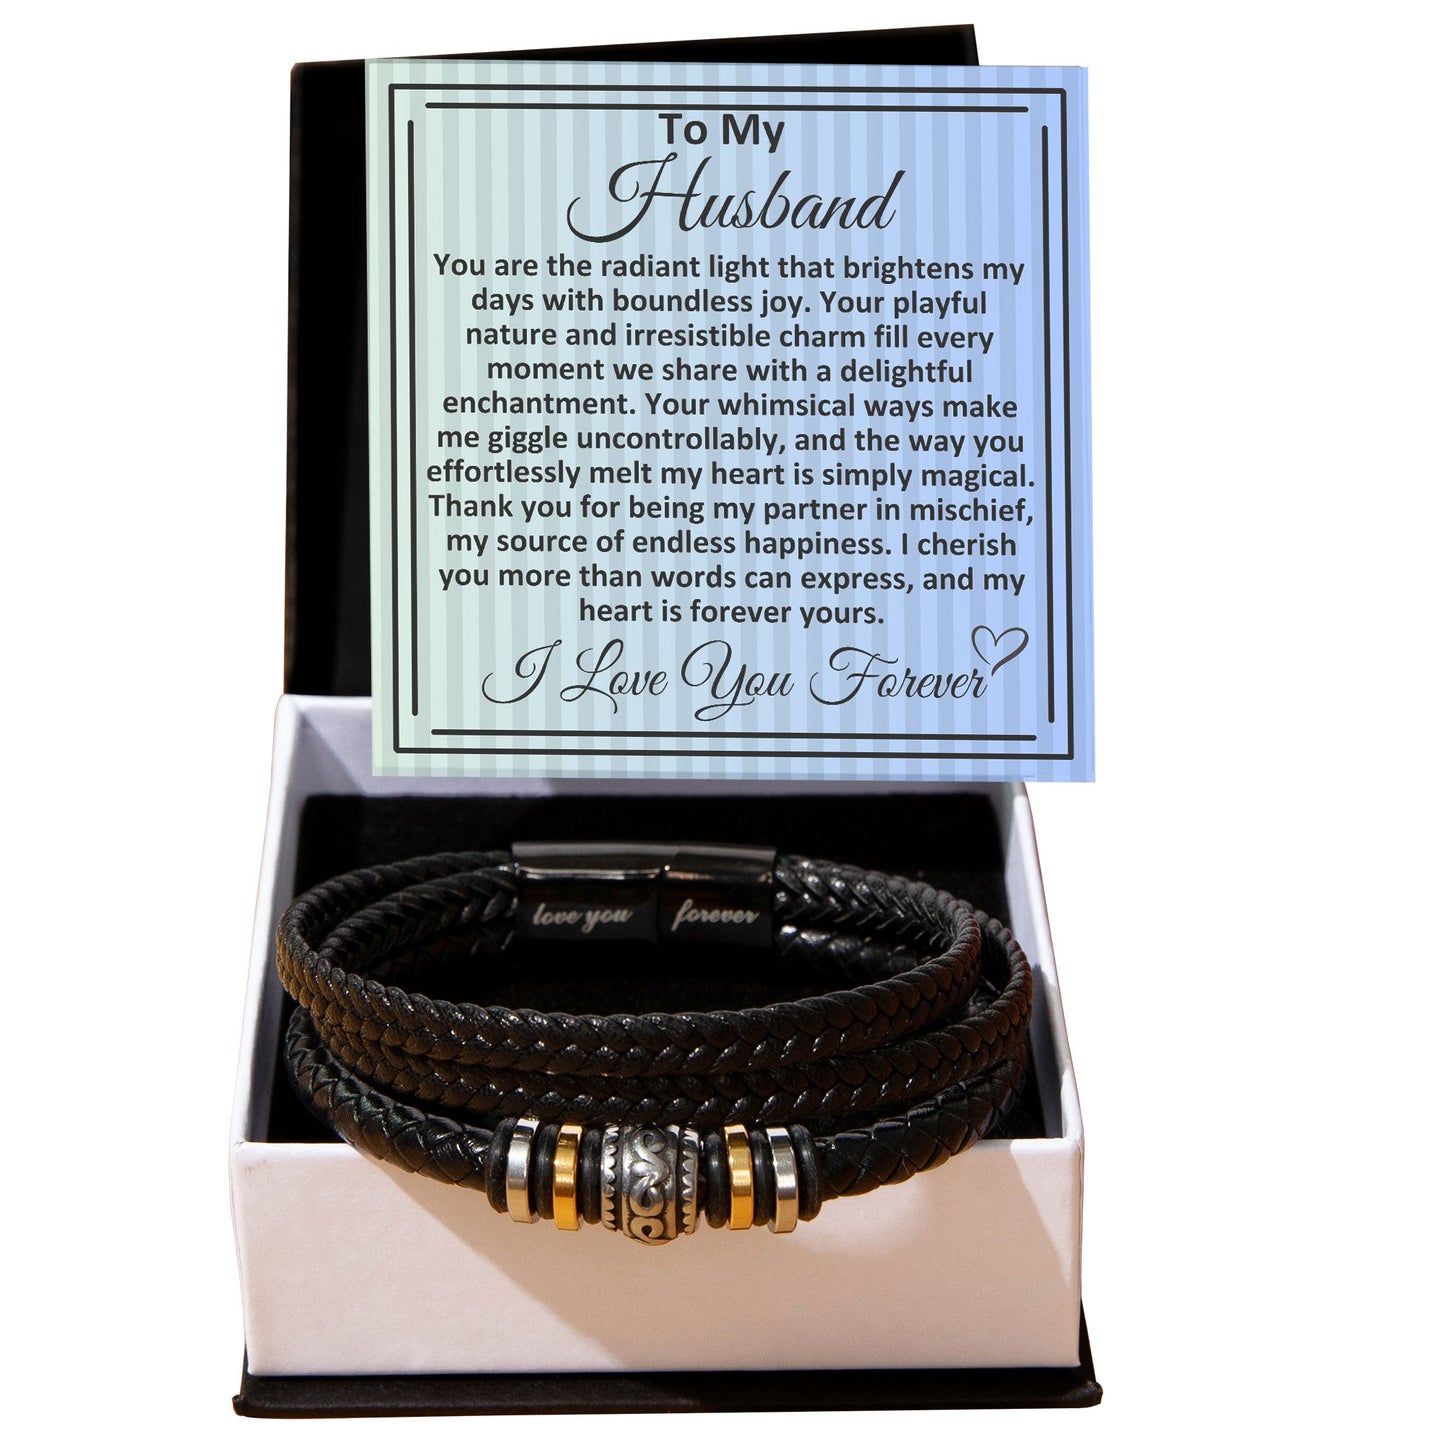 Birthday Gifts Ideas To My Husband/Soulmate, Vegan Leather Bracelet With A Message Card In A Gift Box, Unique Mens Jewelry Present From Wife, Bday Presents To My Hubby - Zahlia